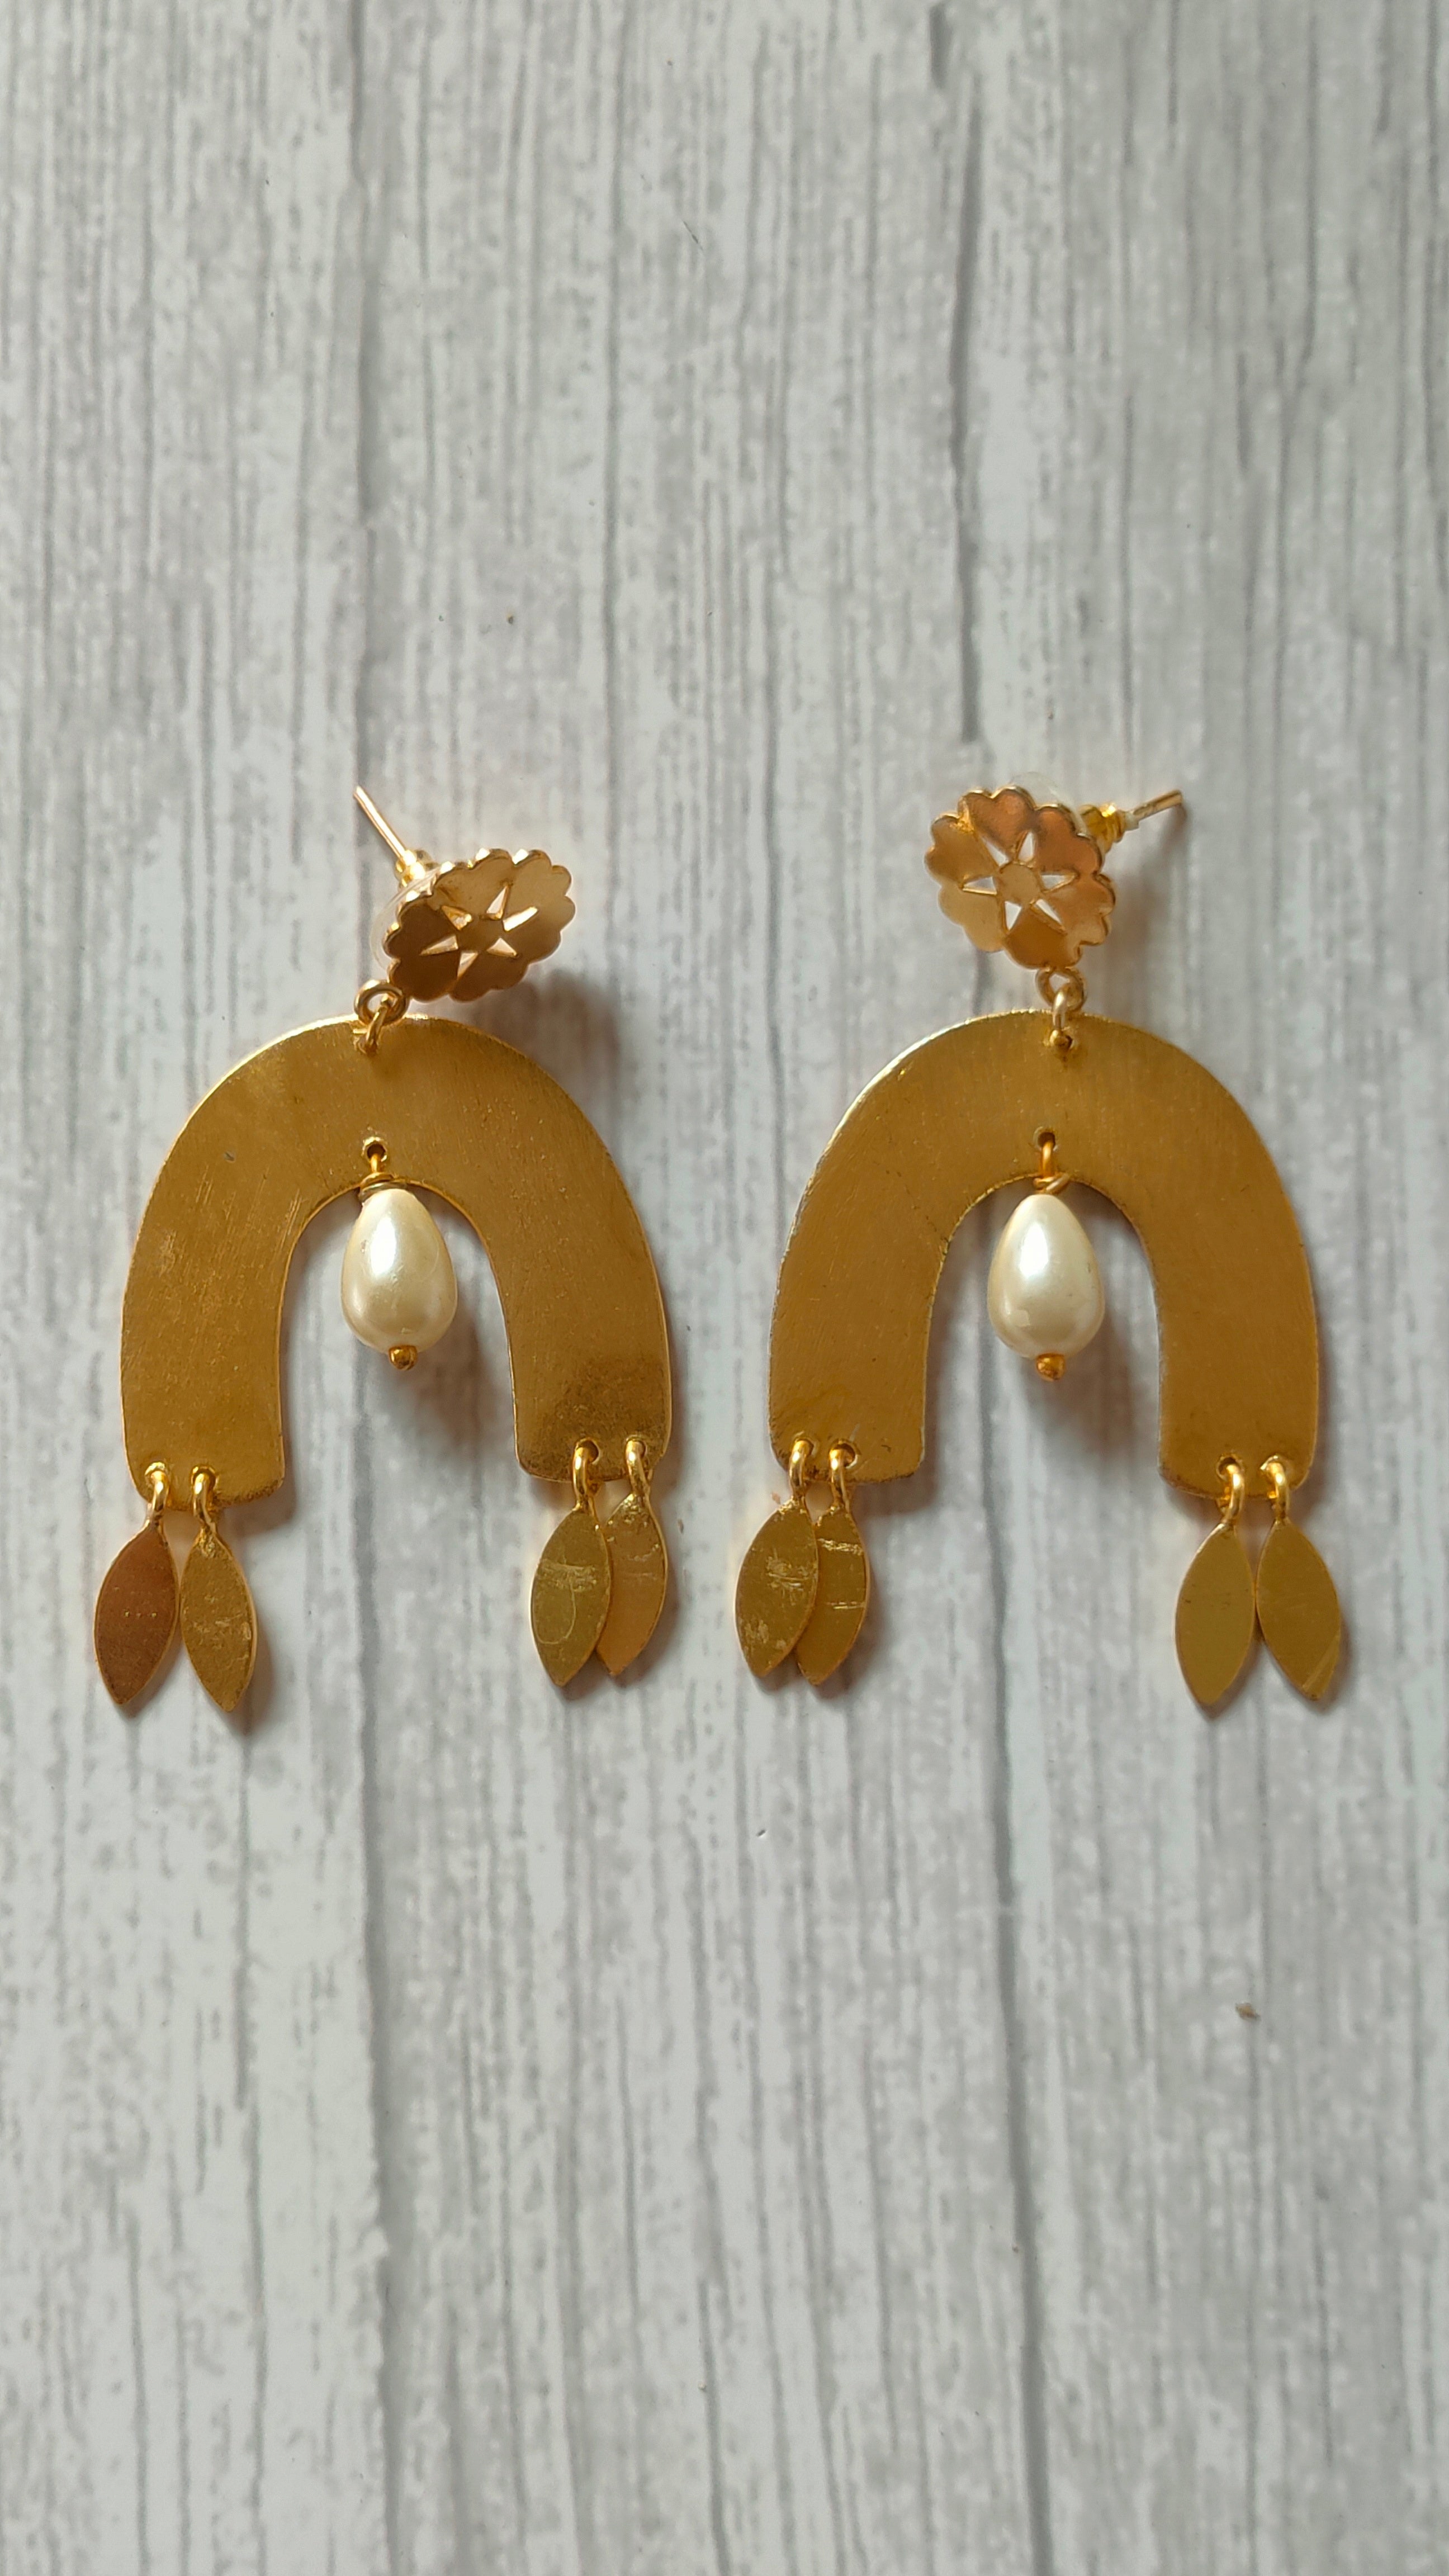 Horse Shoe Brass Earrings with Leaf Danglers and Pearl Beads